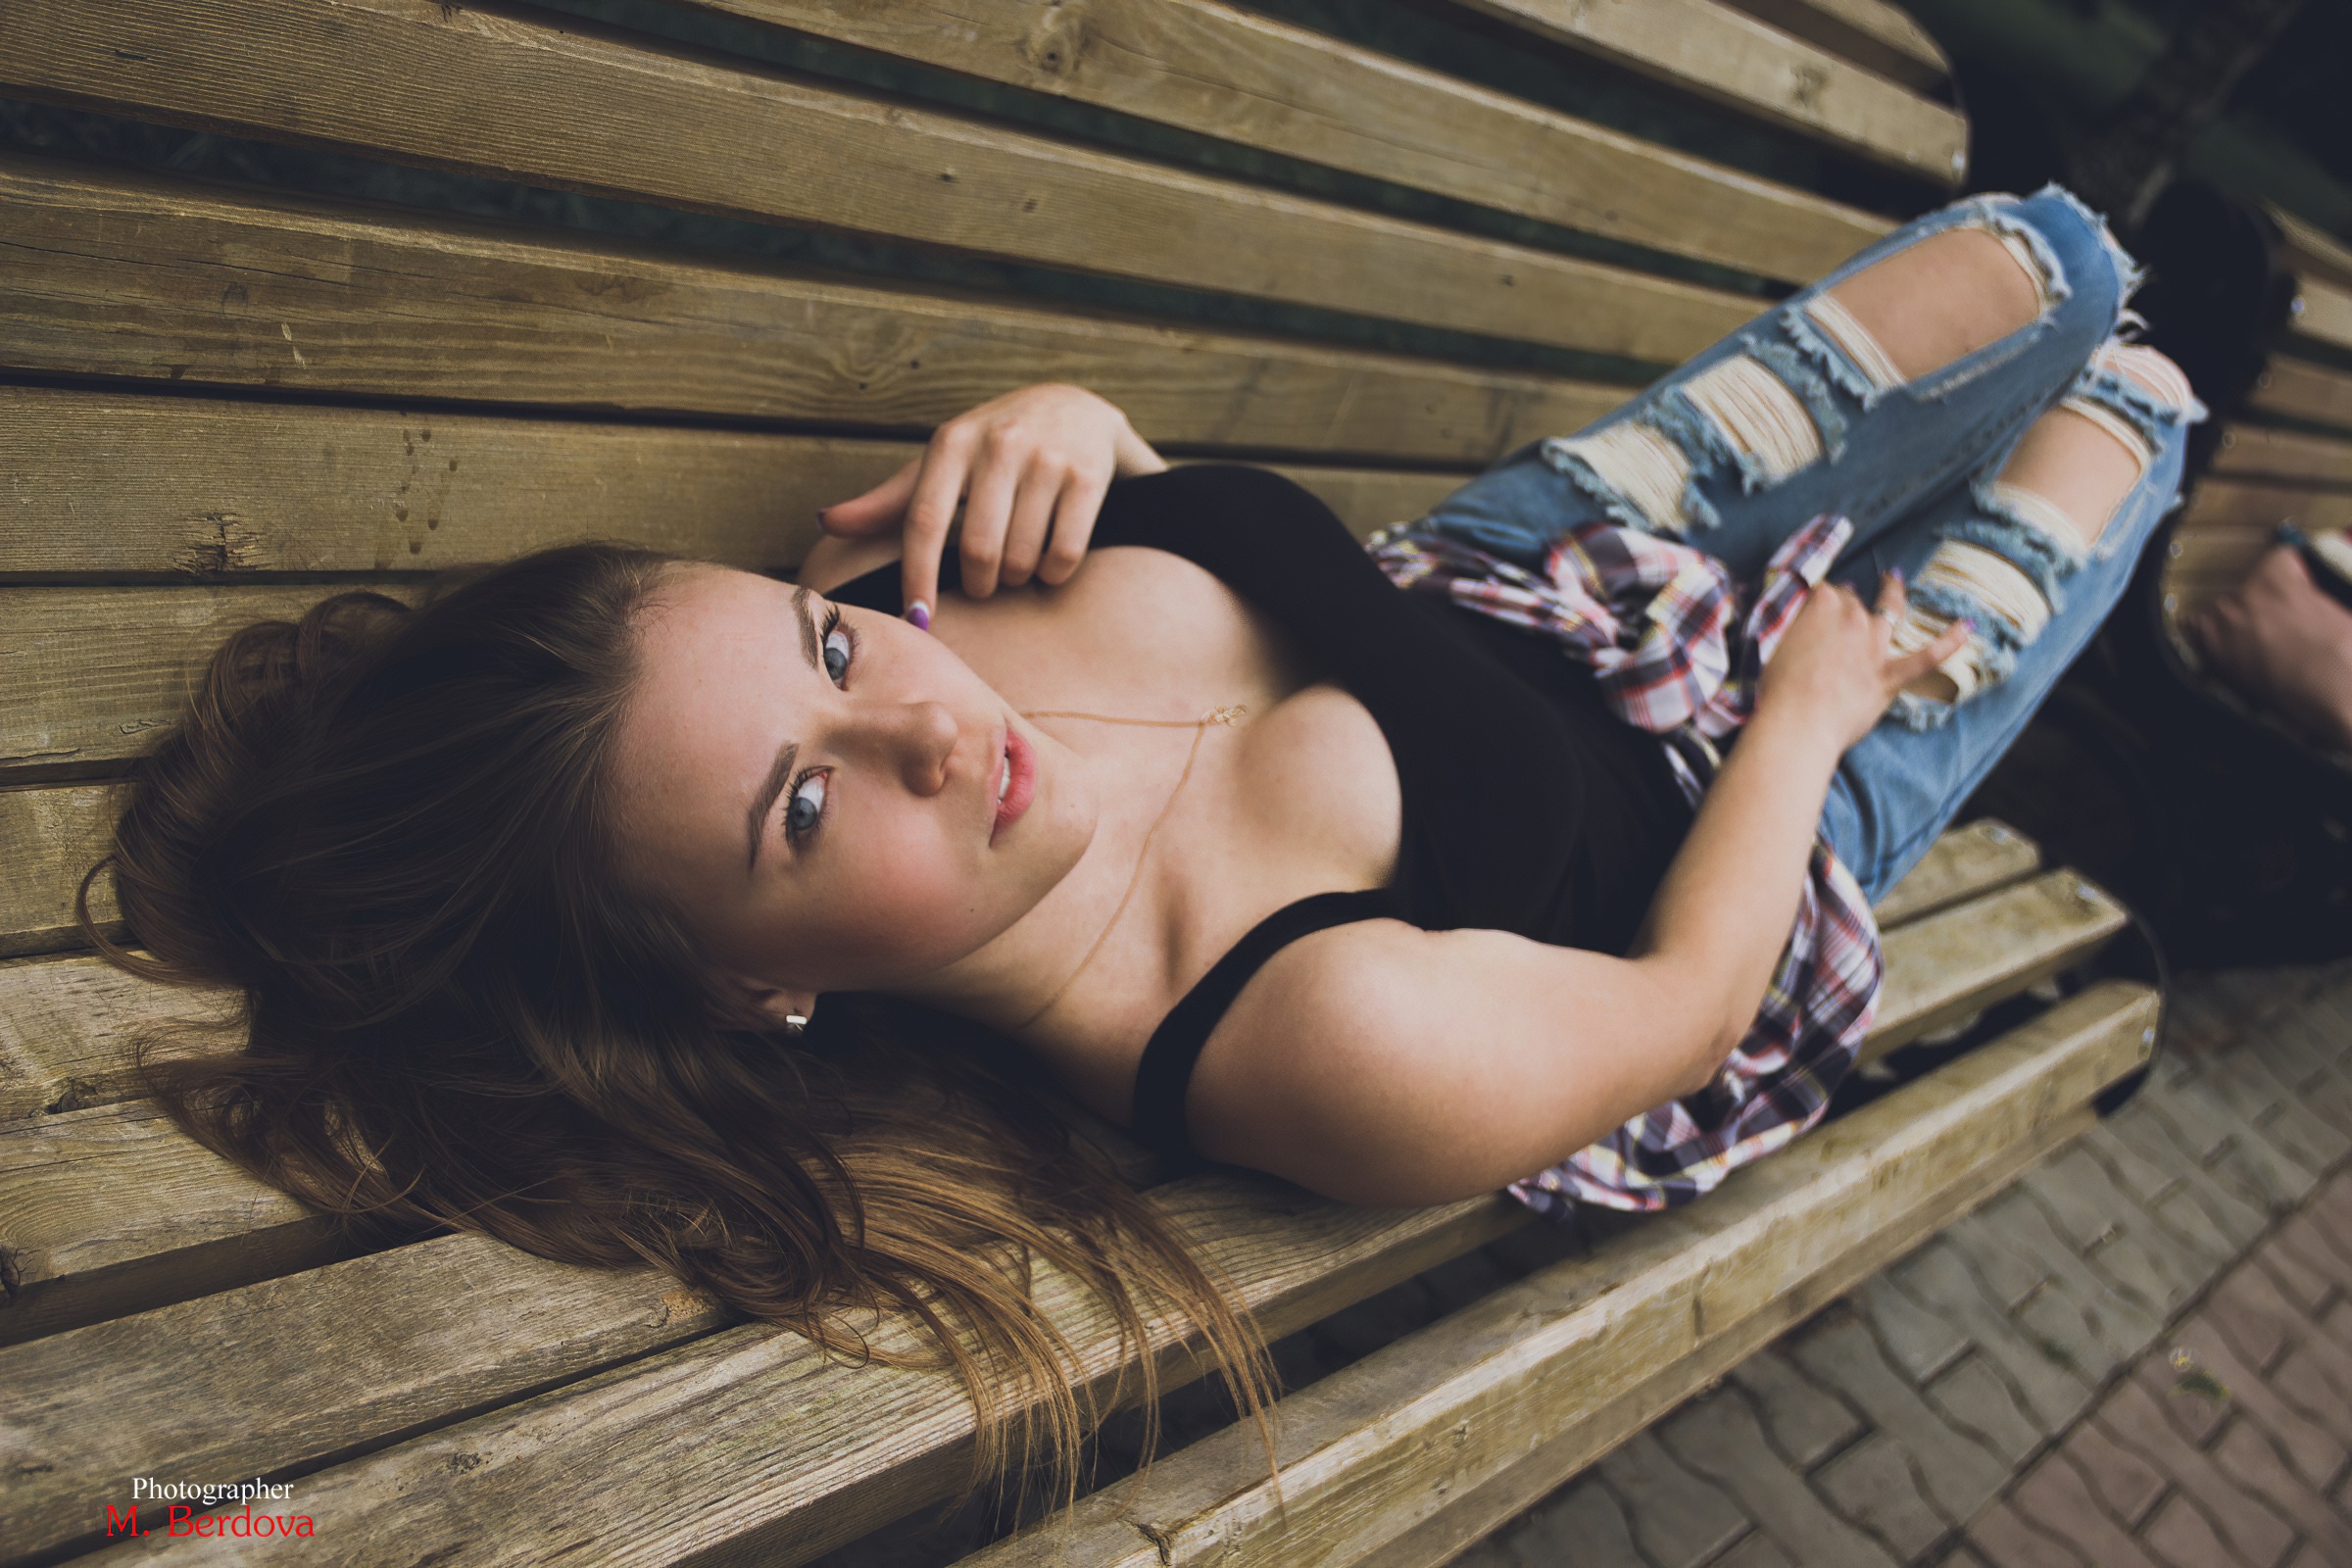 Women Model Red Lipstick Black Top Jeans Lying Down Looking At Viewer Women Outdoors 2400x1600